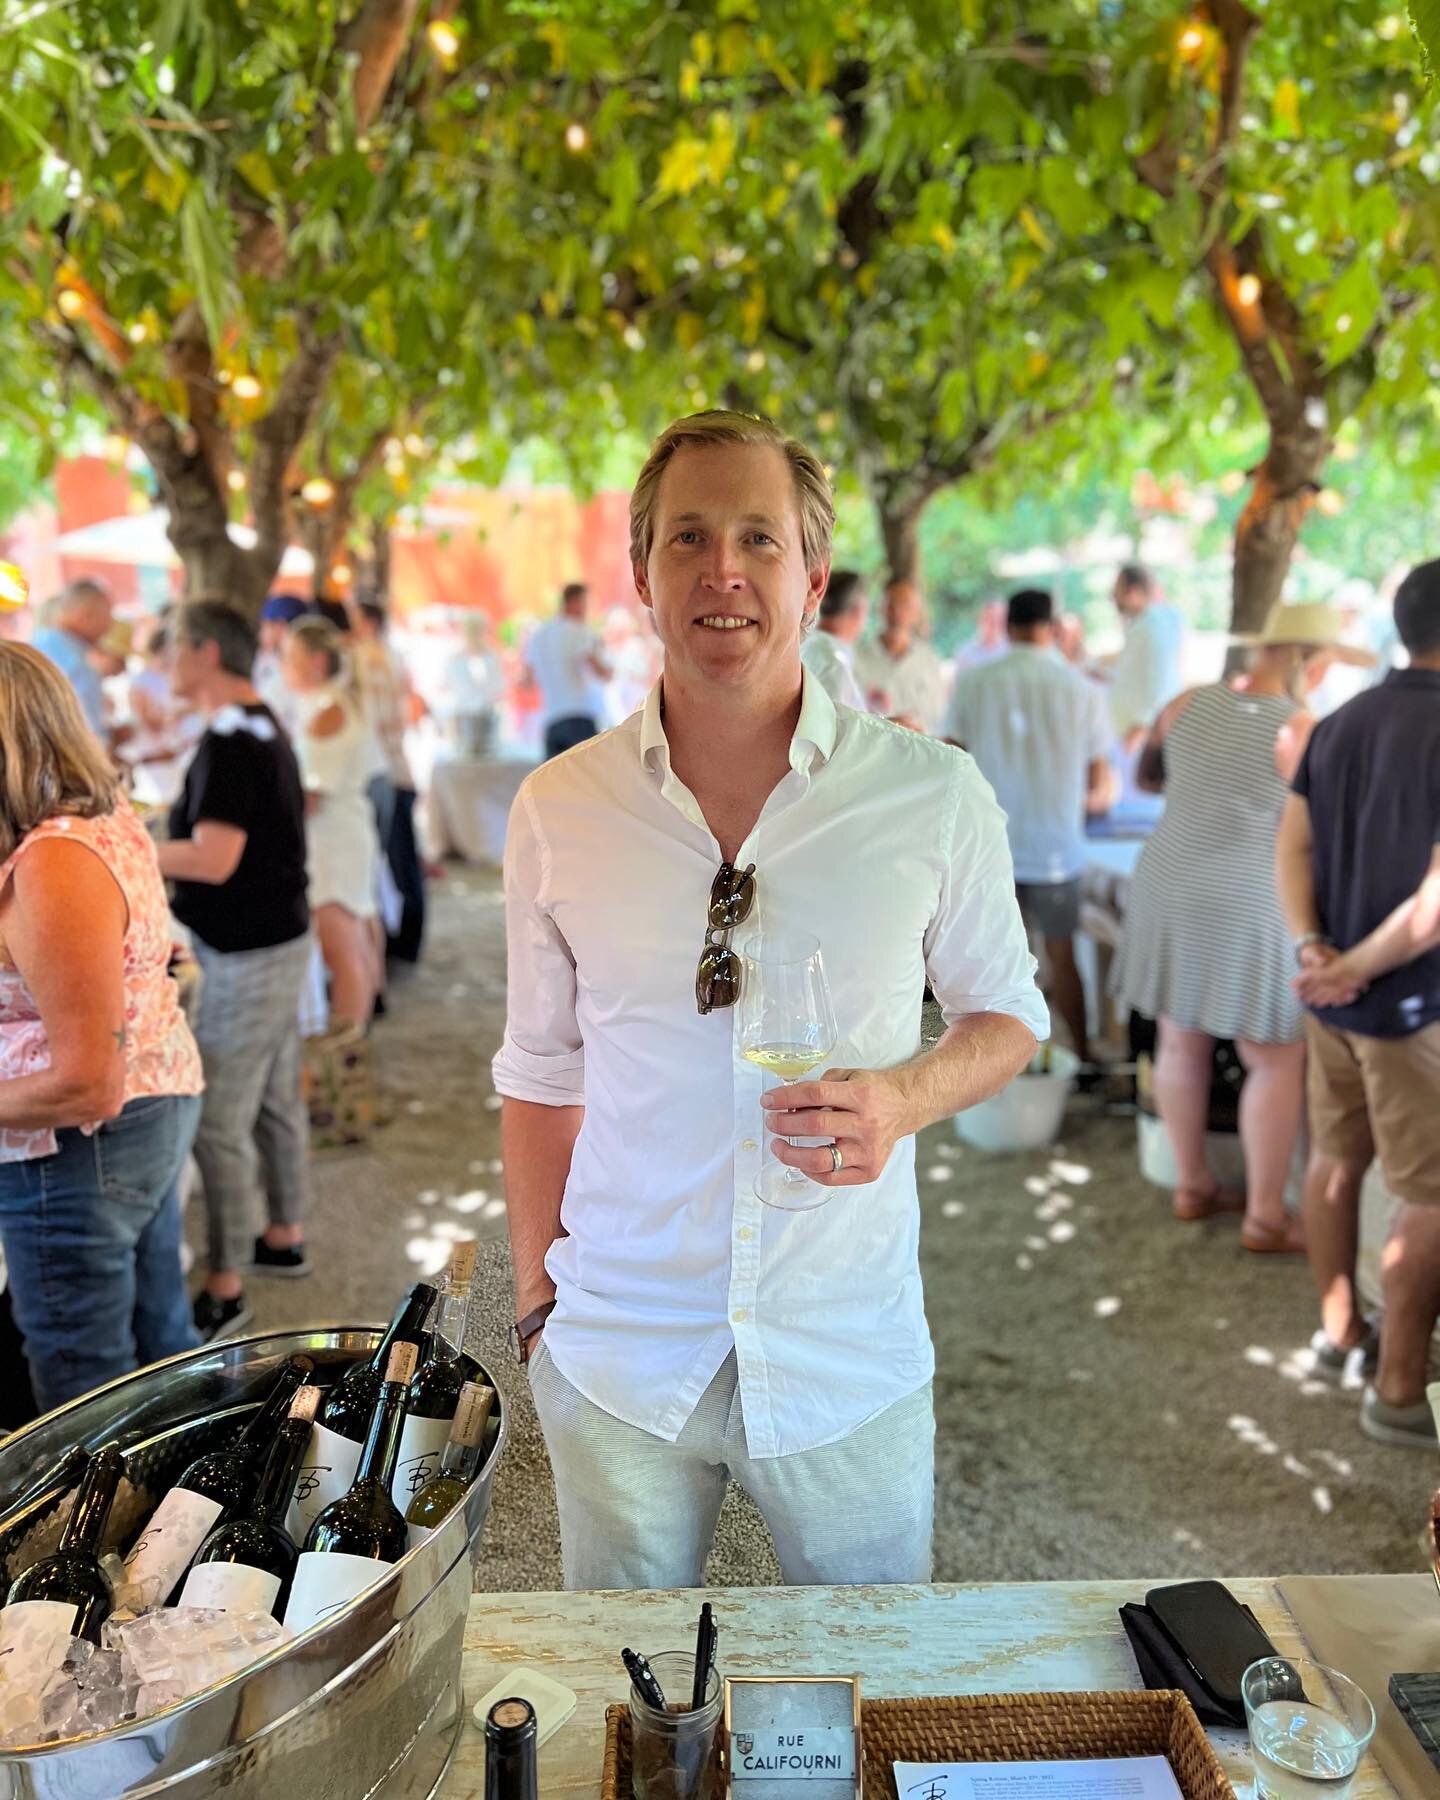 Dressed and pressed for one last event before harvest starts. F&ecirc;te Blanc @barndivahealdsburg on Sunday was a great chance to dust off my chatting skills, pull out some crisp whites (shirts and wines!), and share some lovely Chenin Blanc! 
.
.
.